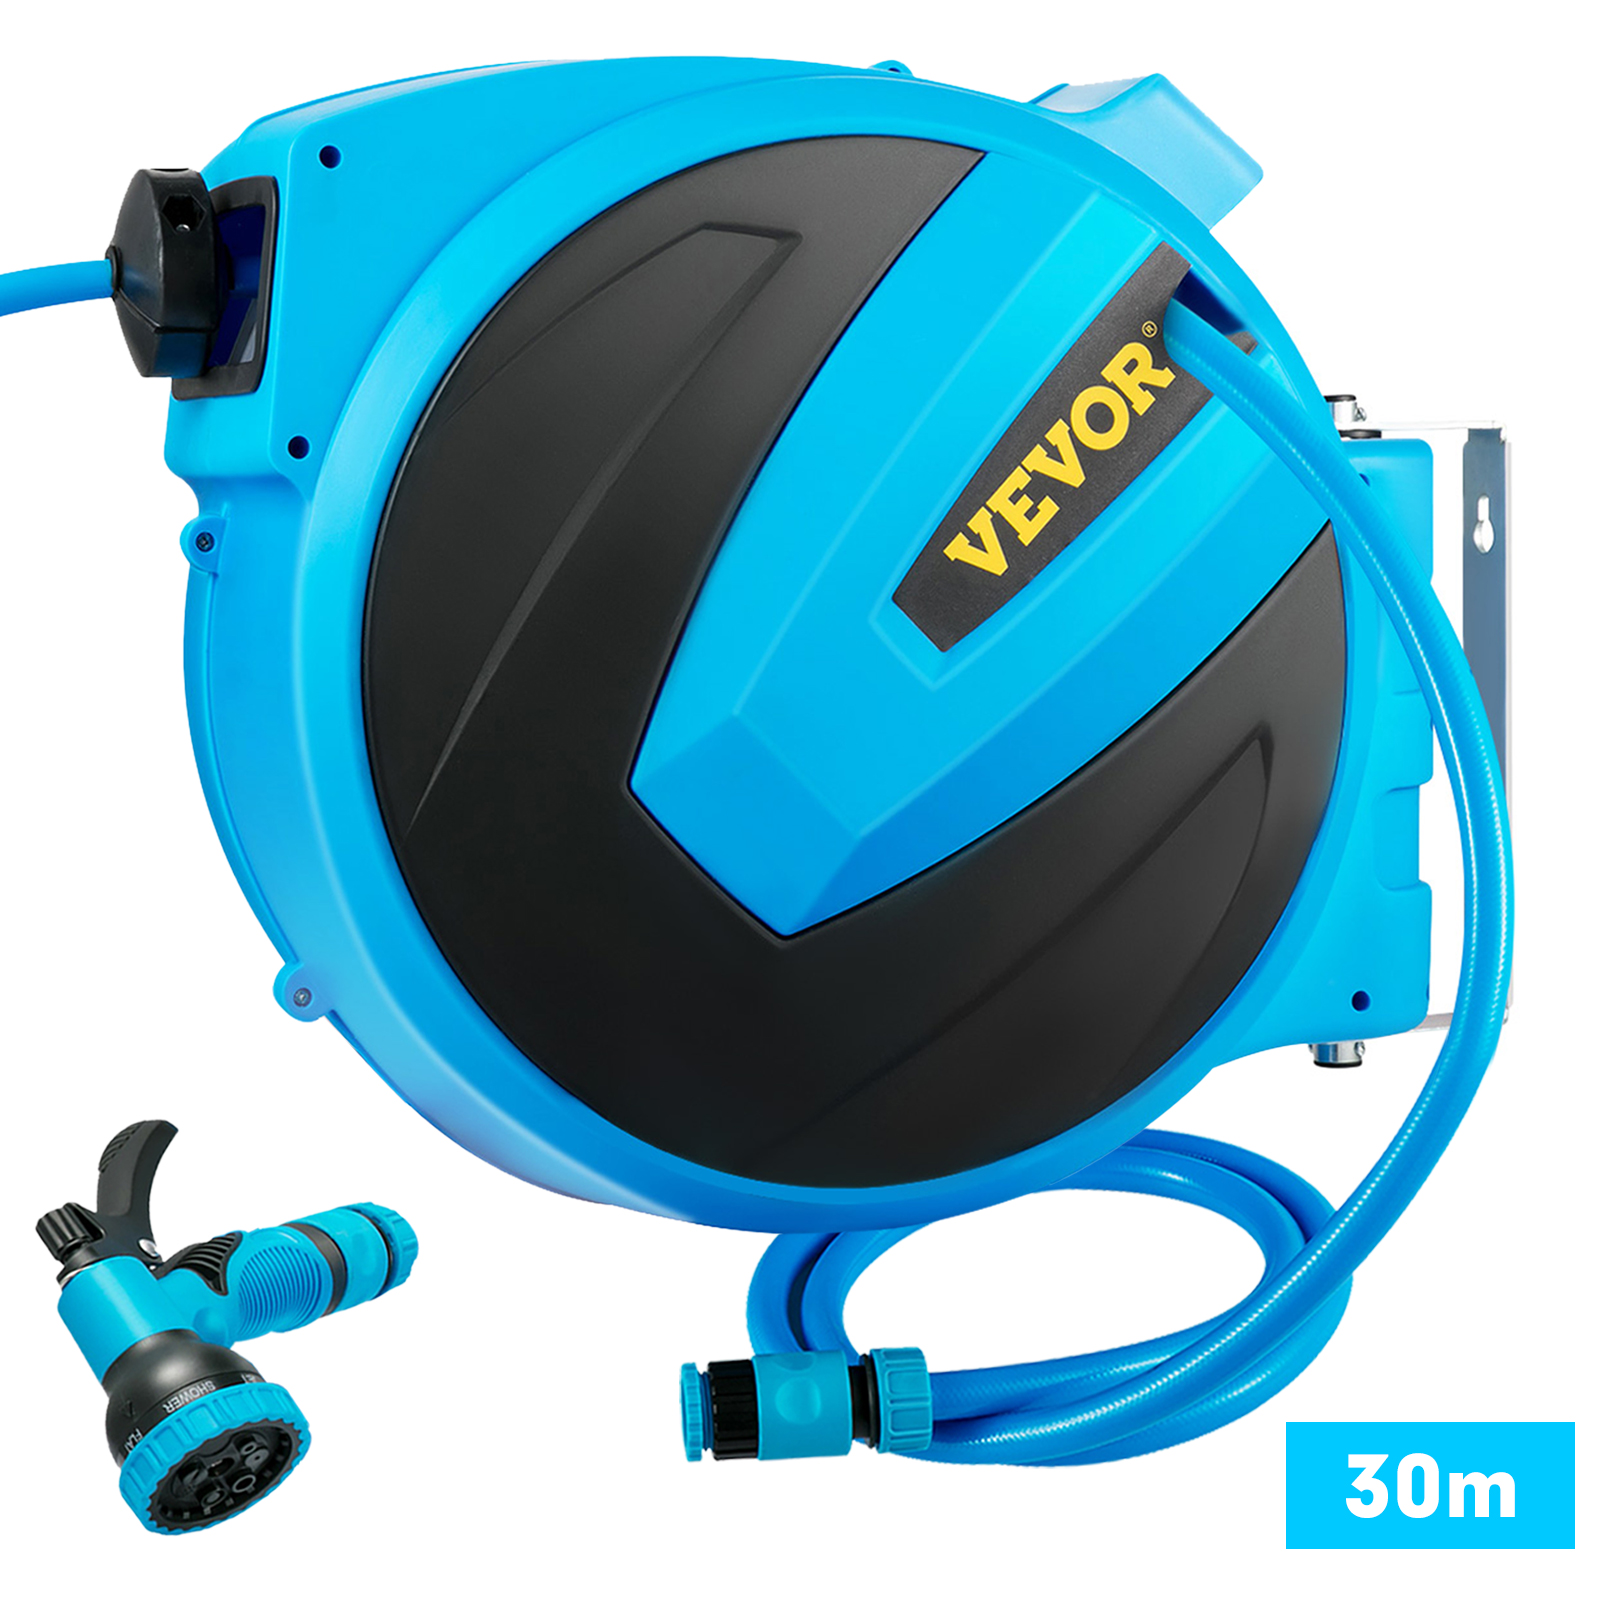 VEVOR Retractable Hose Reel, 1/2 inch x 100 ft, Any Length Lock